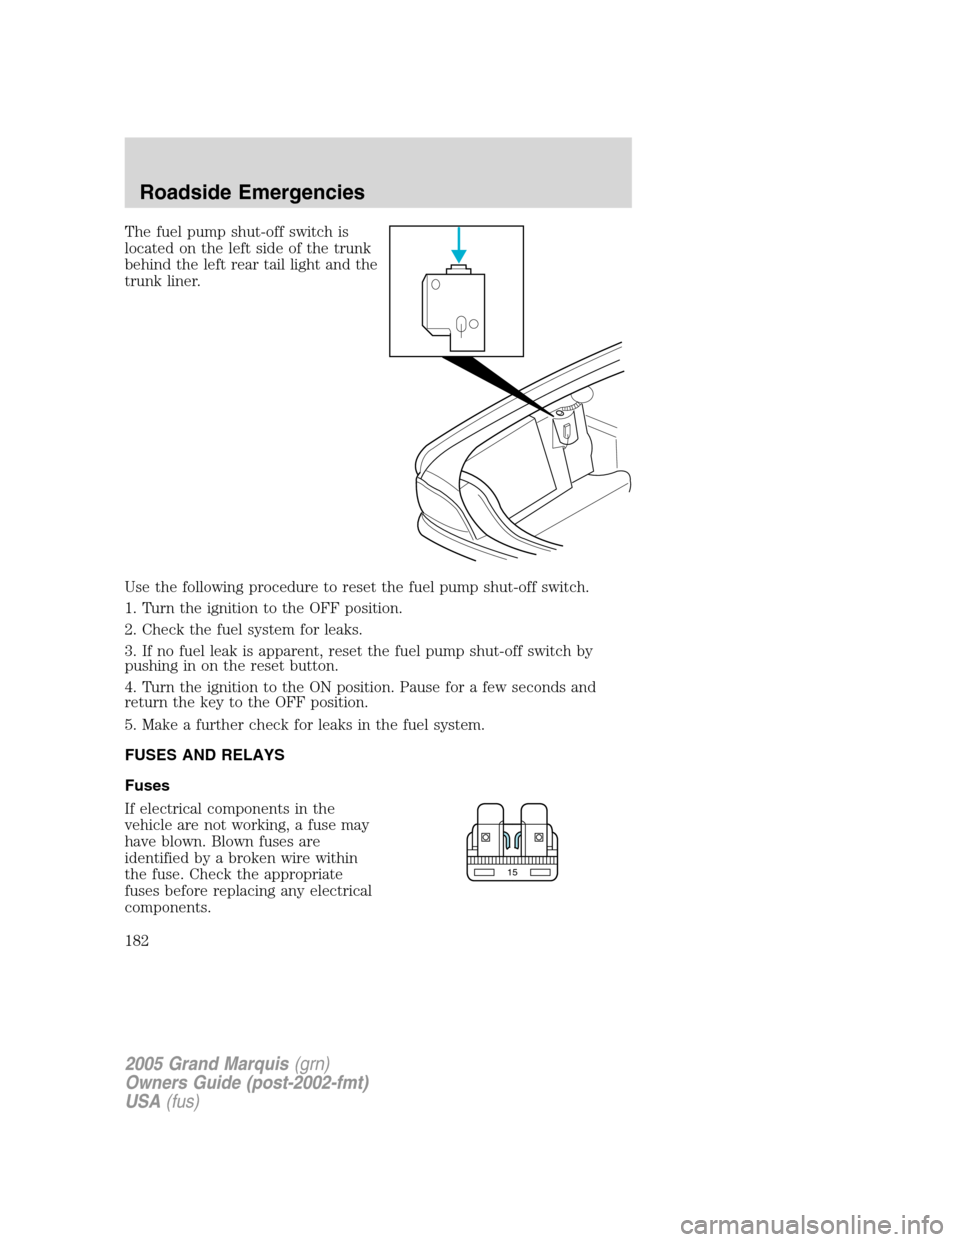 Mercury Grand Marquis 2005  Owners Manuals The fuel pump shut-off switch is
located on the left side of the trunk
behind the left rear tail light and the
trunk liner.
Use the following procedure to reset the fuel pump shut-off switch.
1. Turn 